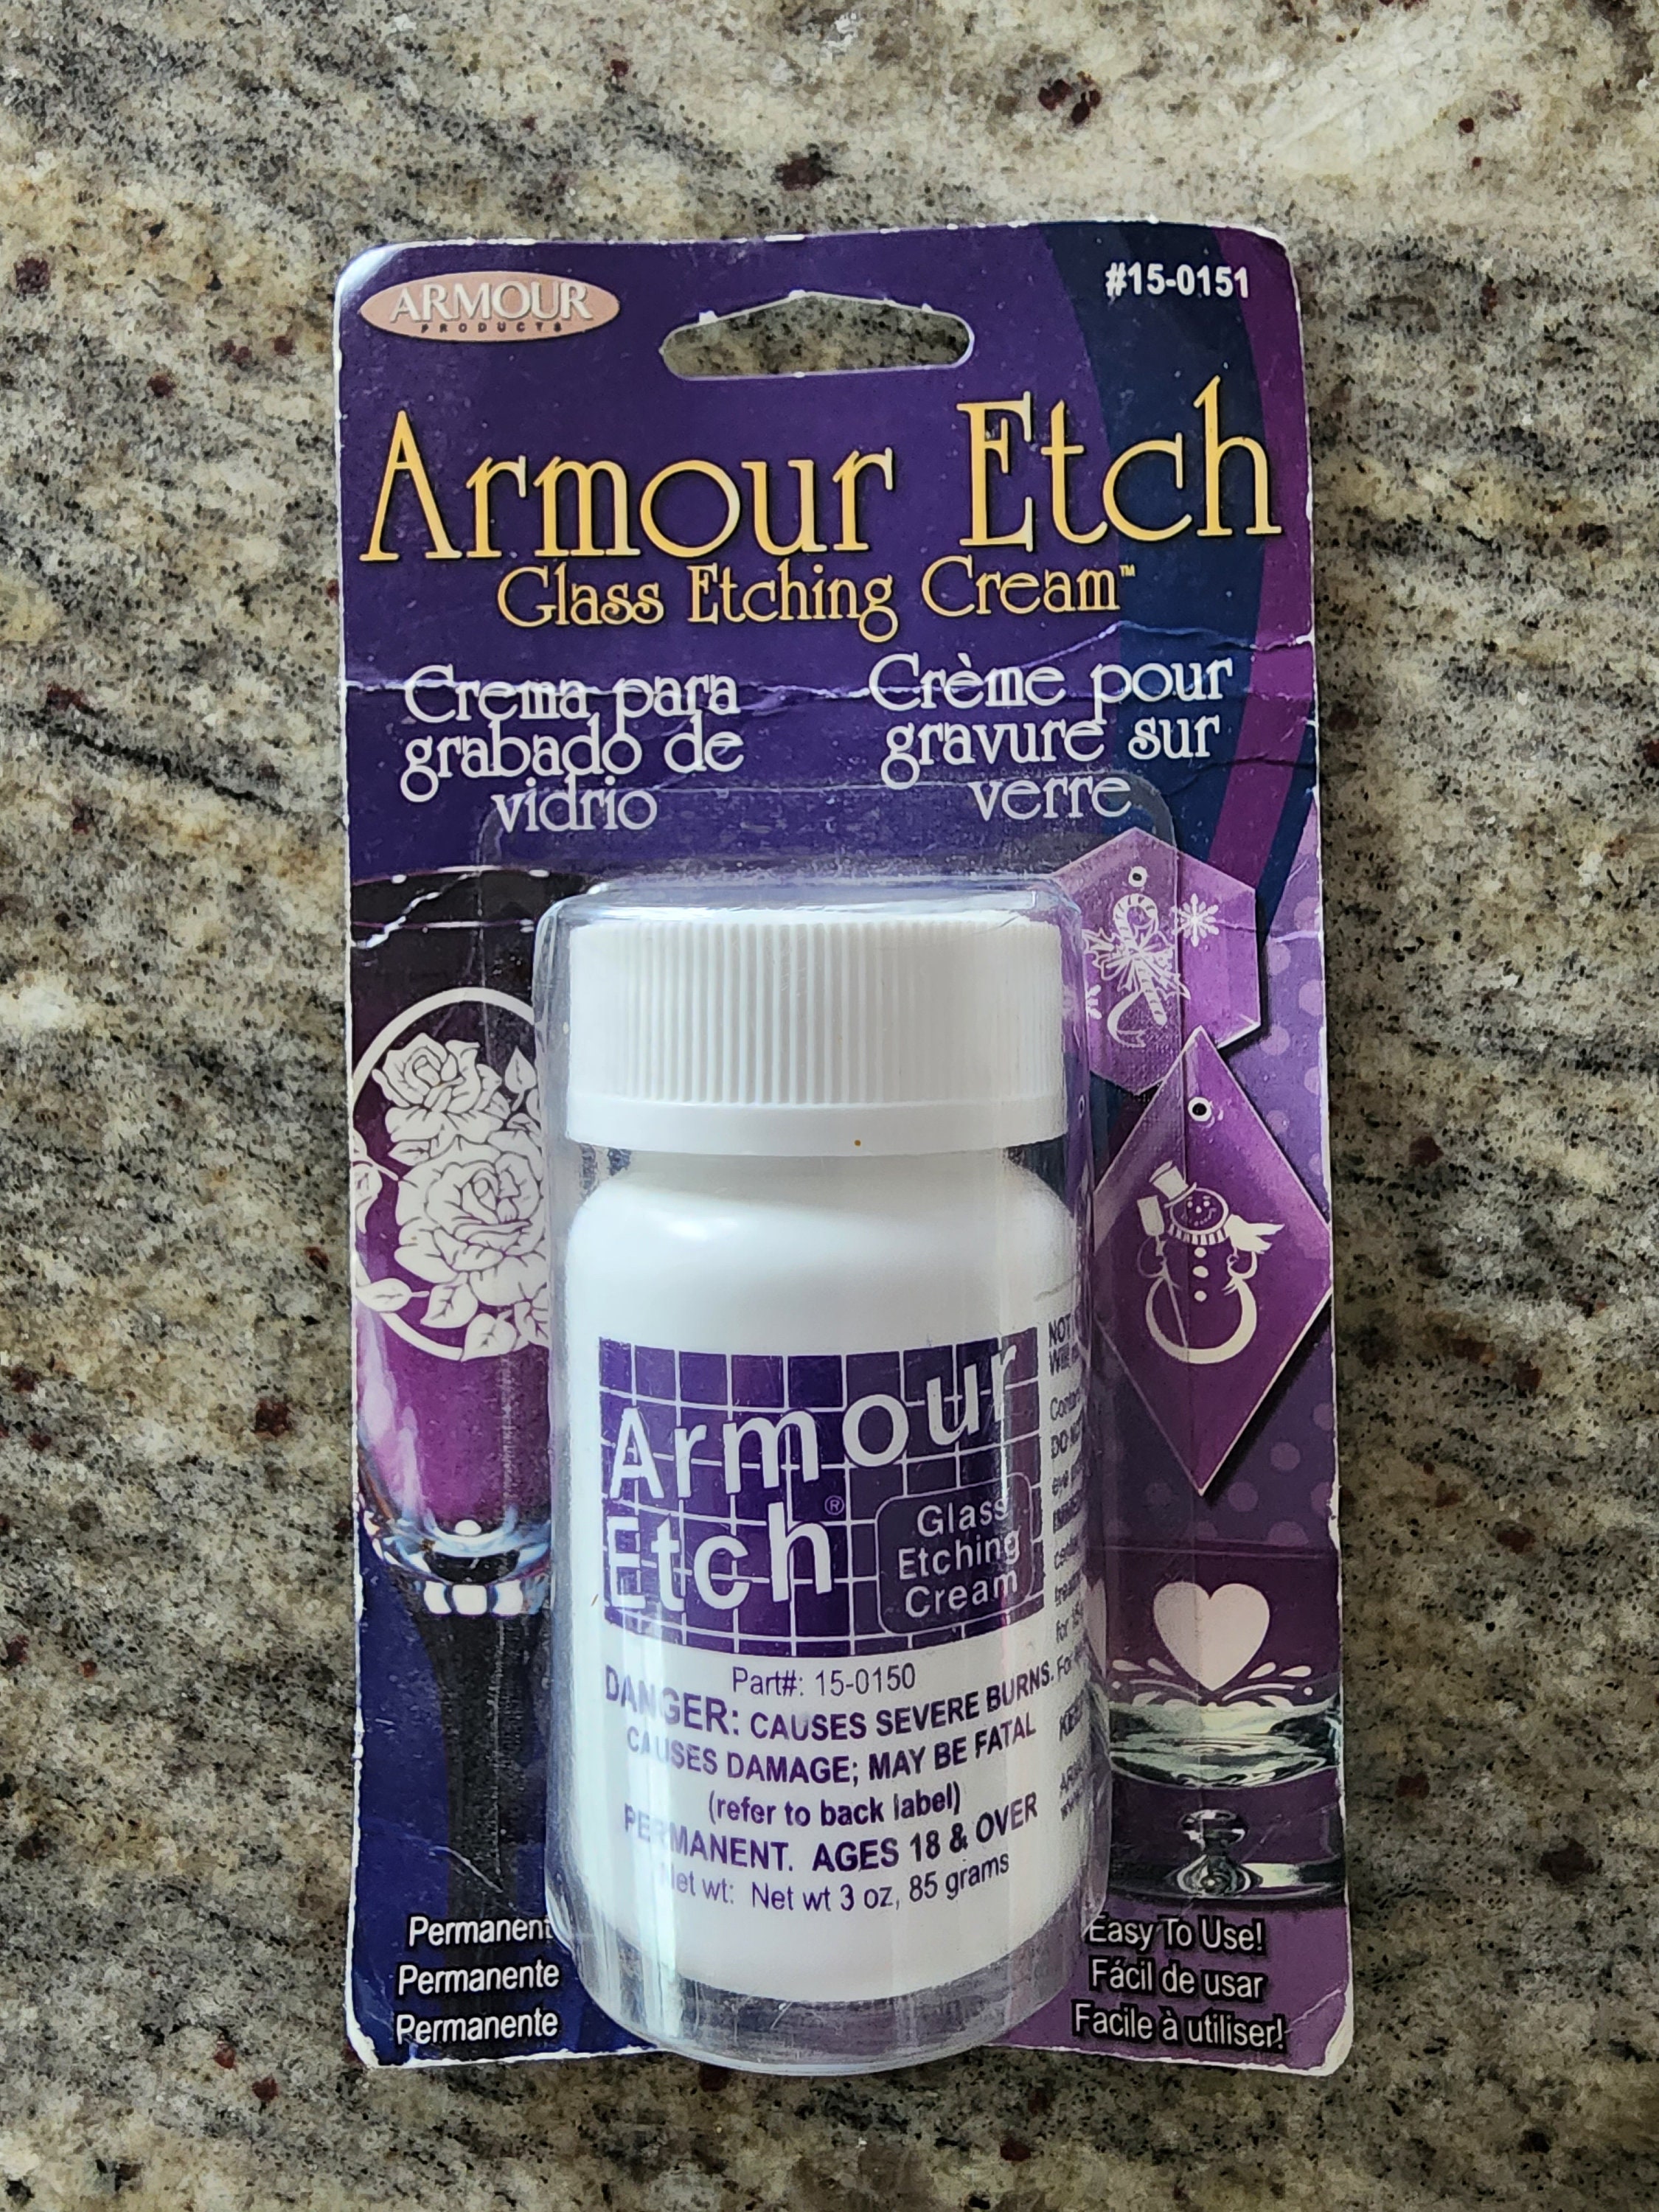 Armour Etch Glass Etching Cream 